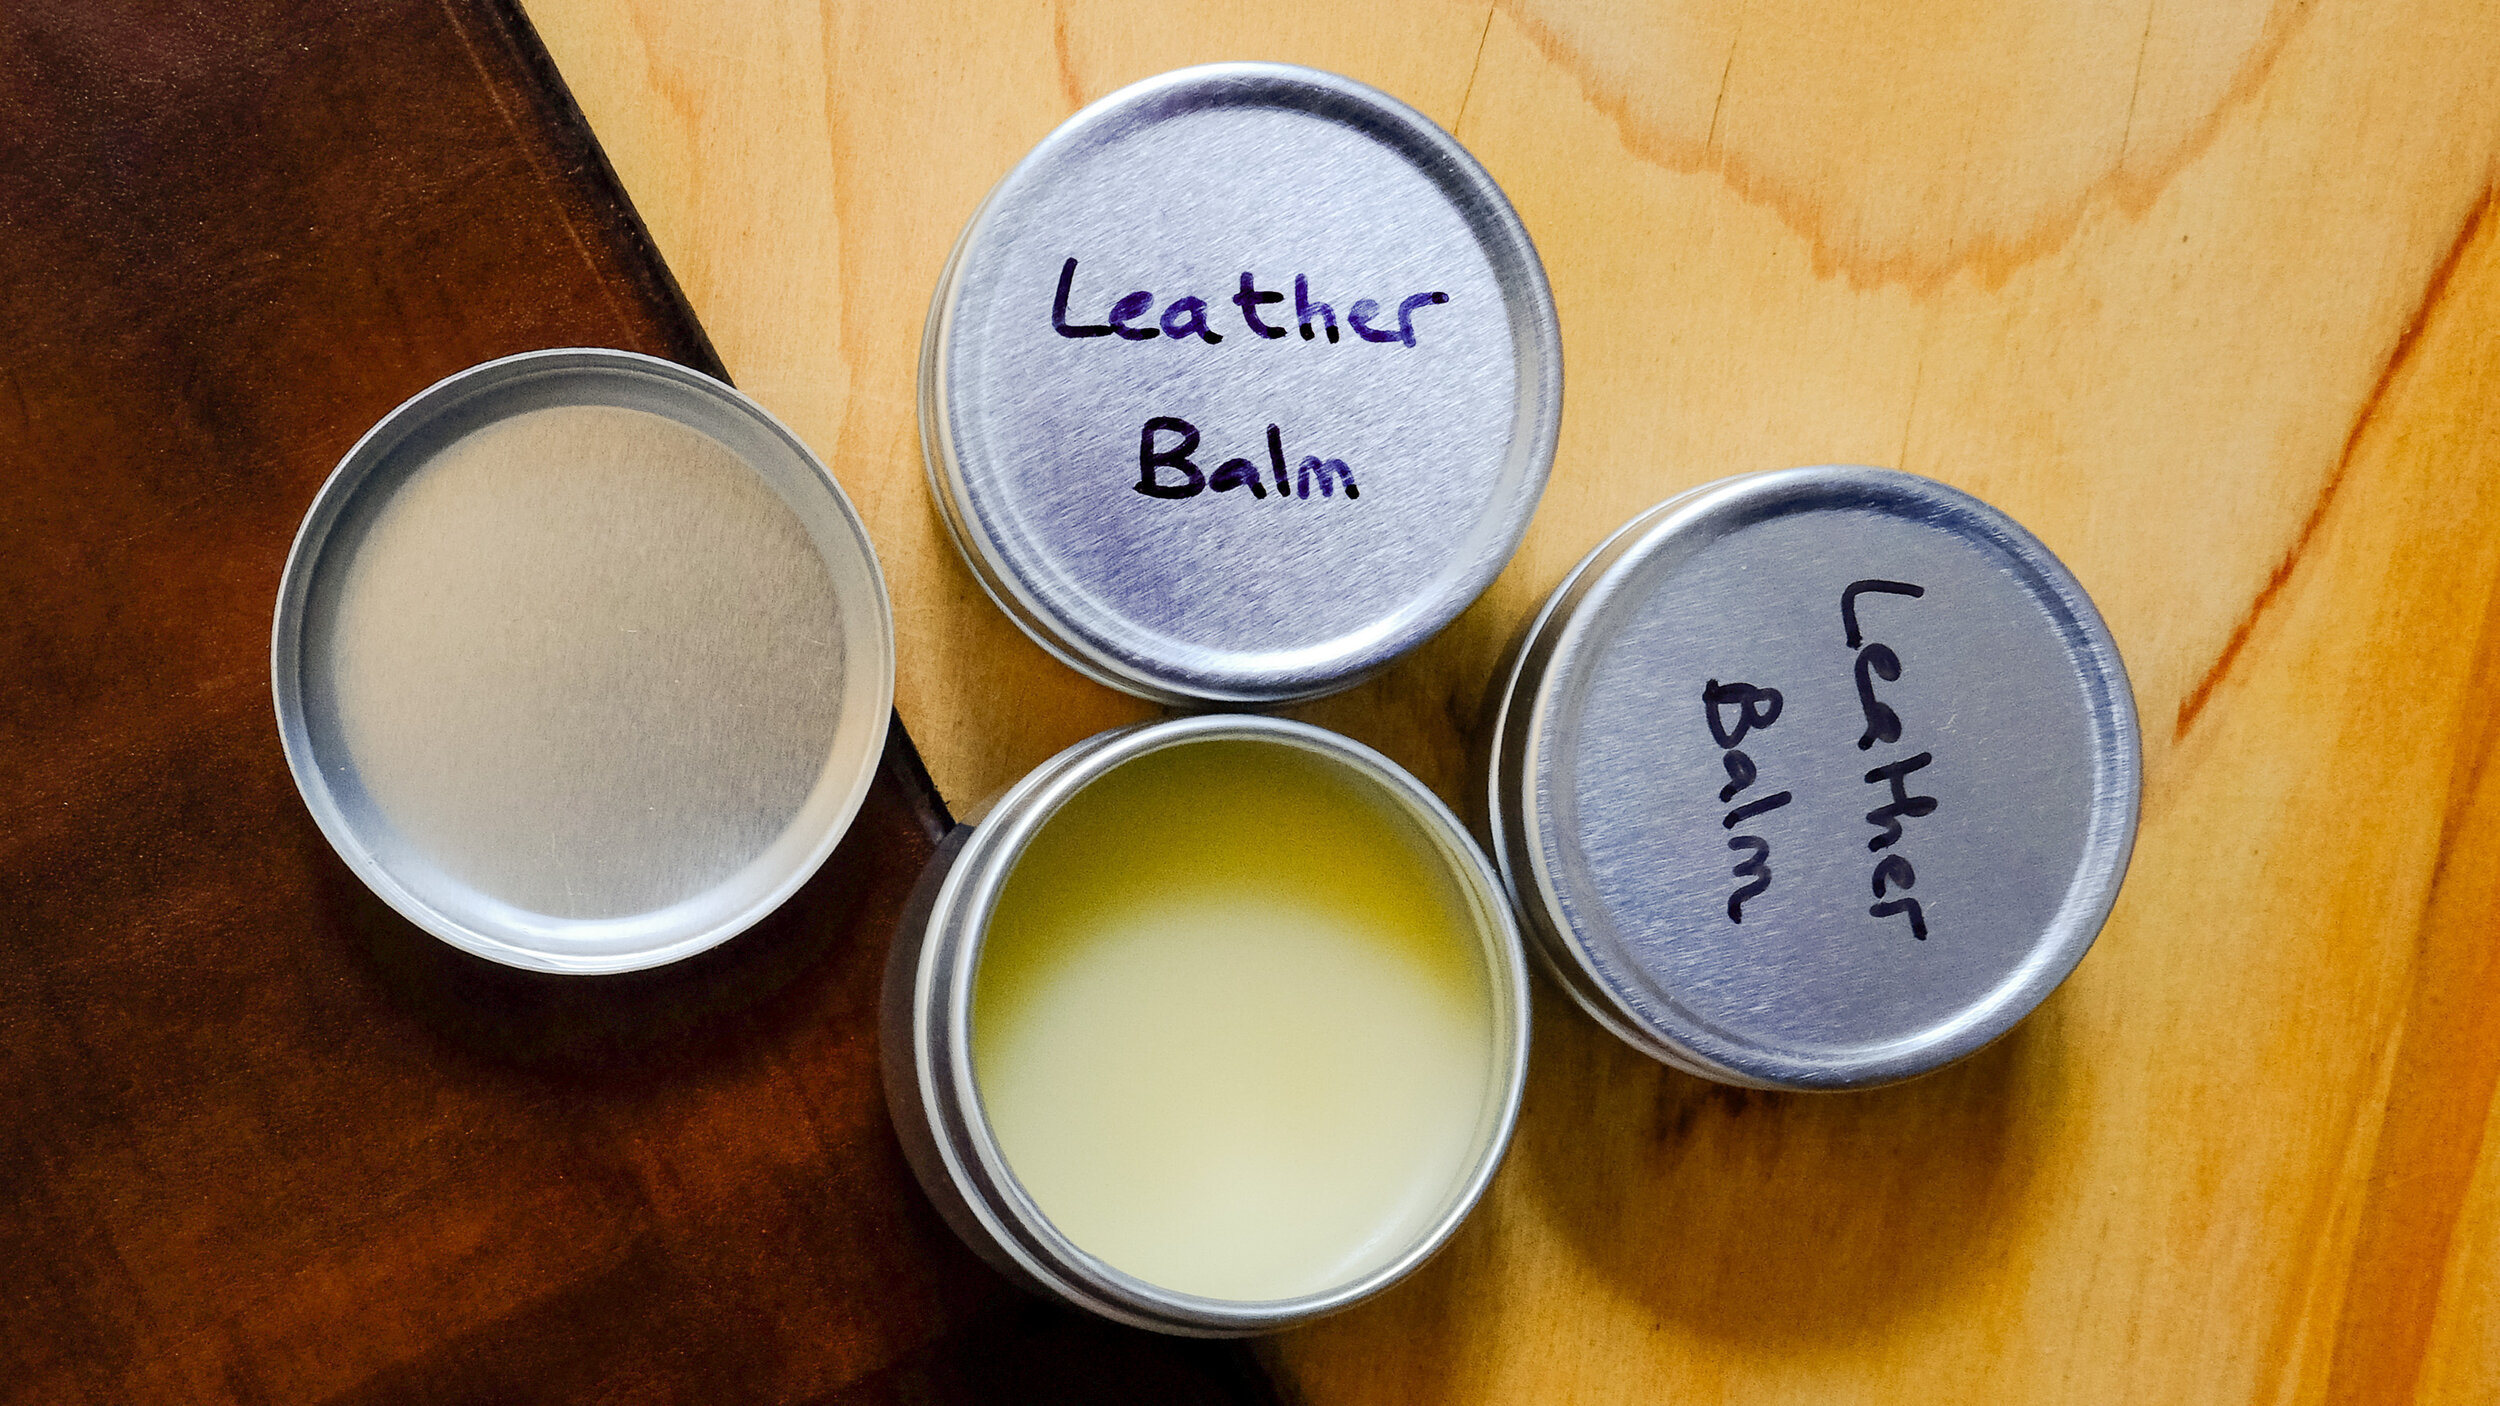 How to Make High Grade Natural Beeswax Leather Polish and